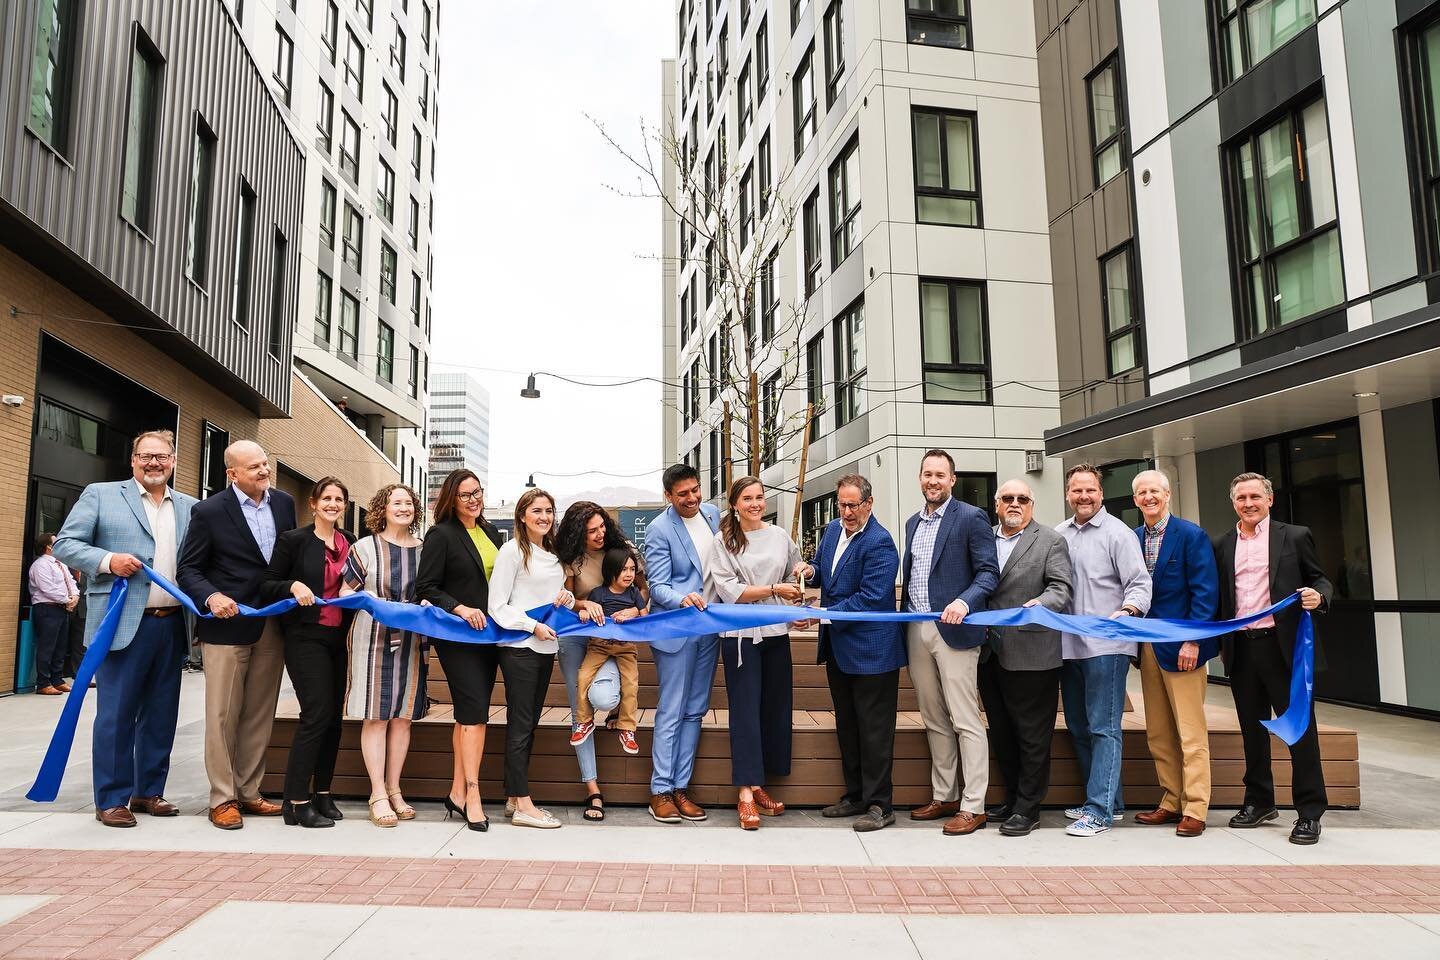 Thank you Salt Lake City for embracing this important and pivotal project for downtown. 
The Grand Opening last week was a huge success thanks to your support.
&bull;
&bull;
&bull;
#downtownslc #saltlakecityutah #saltlakecityliving